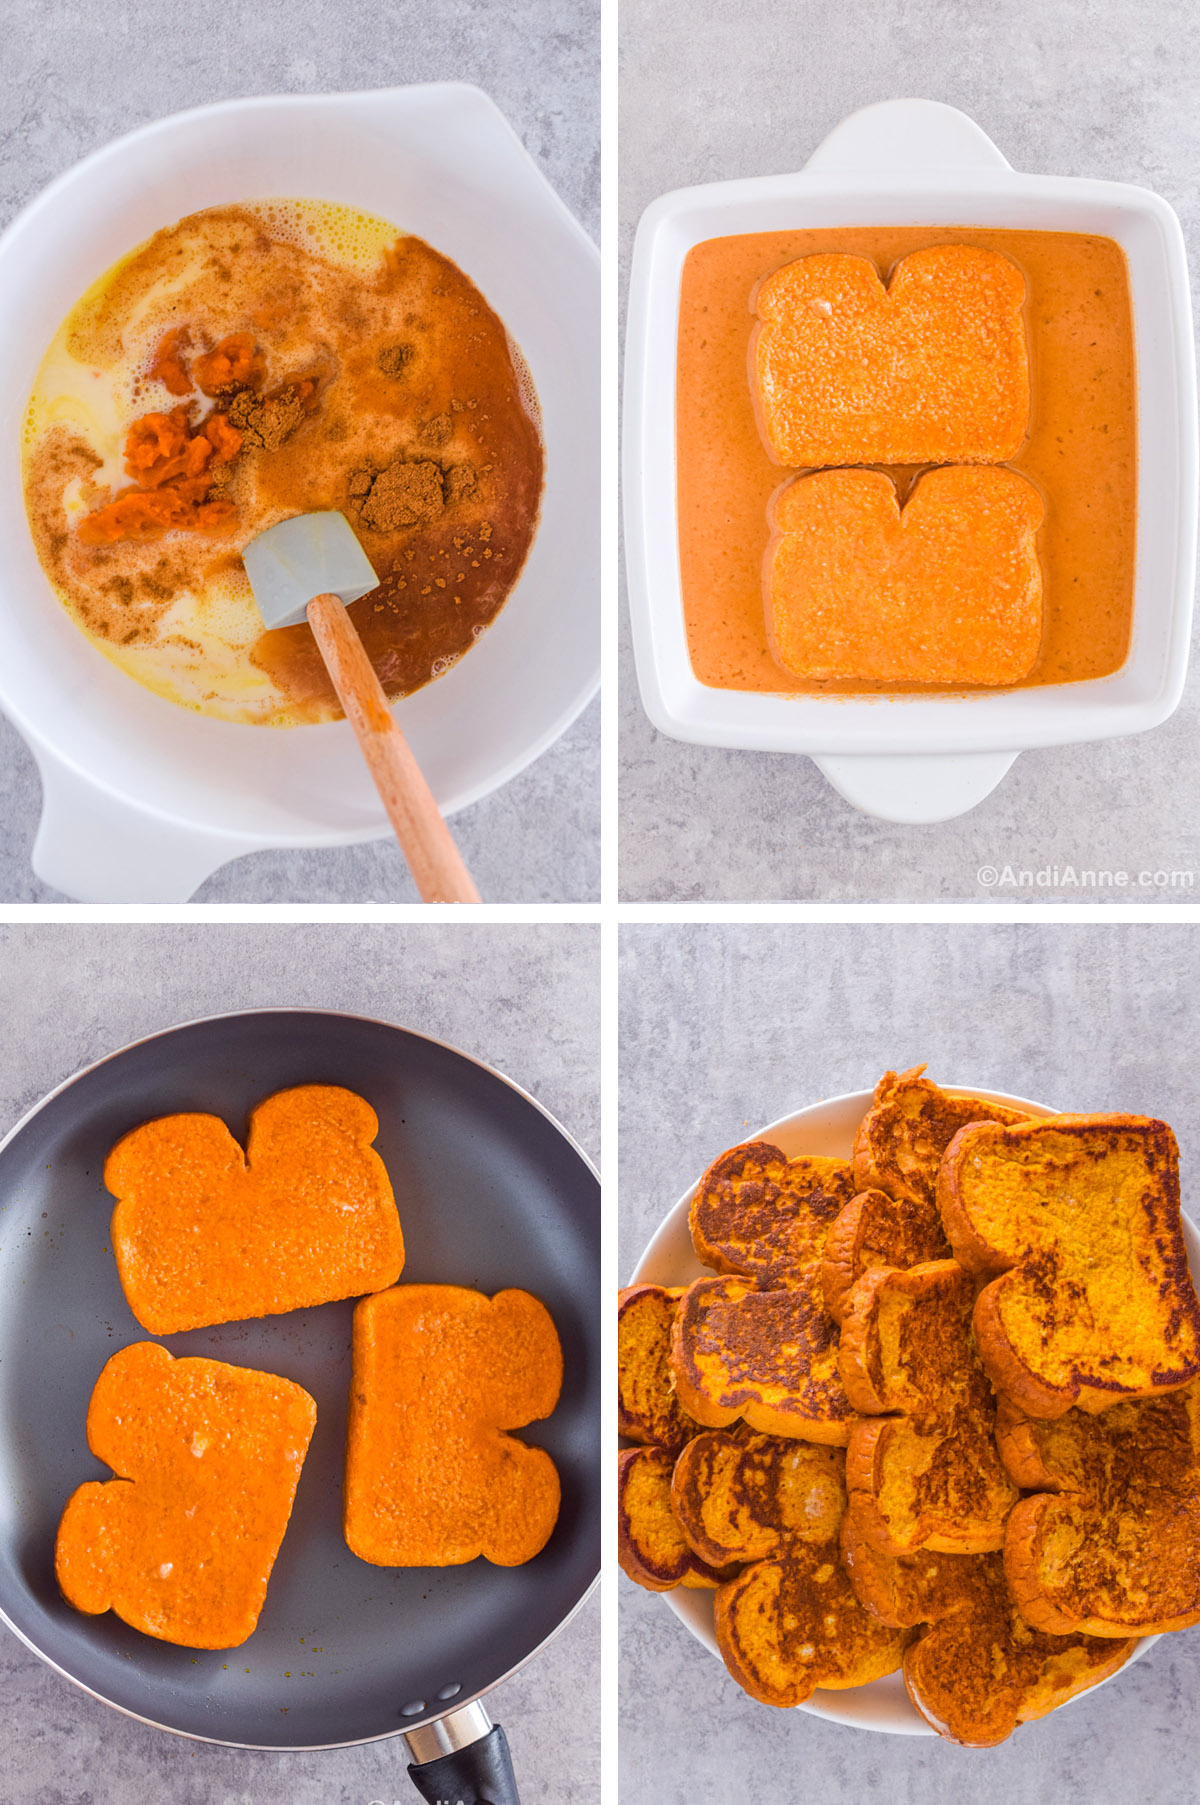 Four images showing steps to make recipe including a white bowl with batter ingredients dumped in with spatula. A square baking dish with orange batter and two slices of bread soaking. A frying pan with three slices of dipped uncooked french toast. And a white plate with a stack of cooked french toast slices.